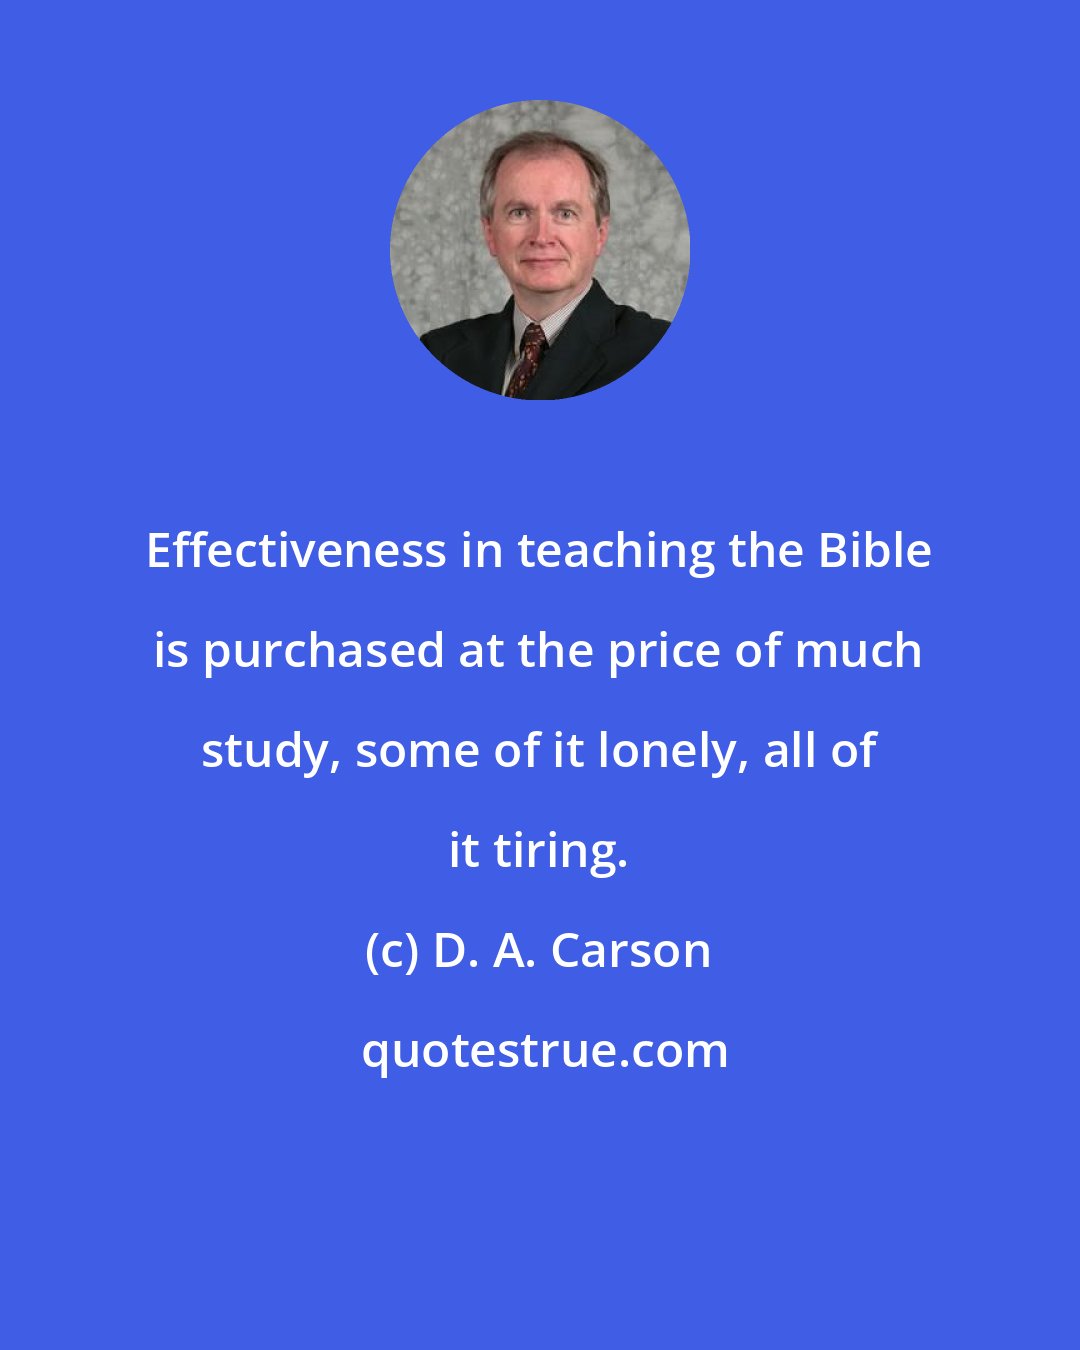 D. A. Carson: Effectiveness in teaching the Bible is purchased at the price of much study, some of it lonely, all of it tiring.